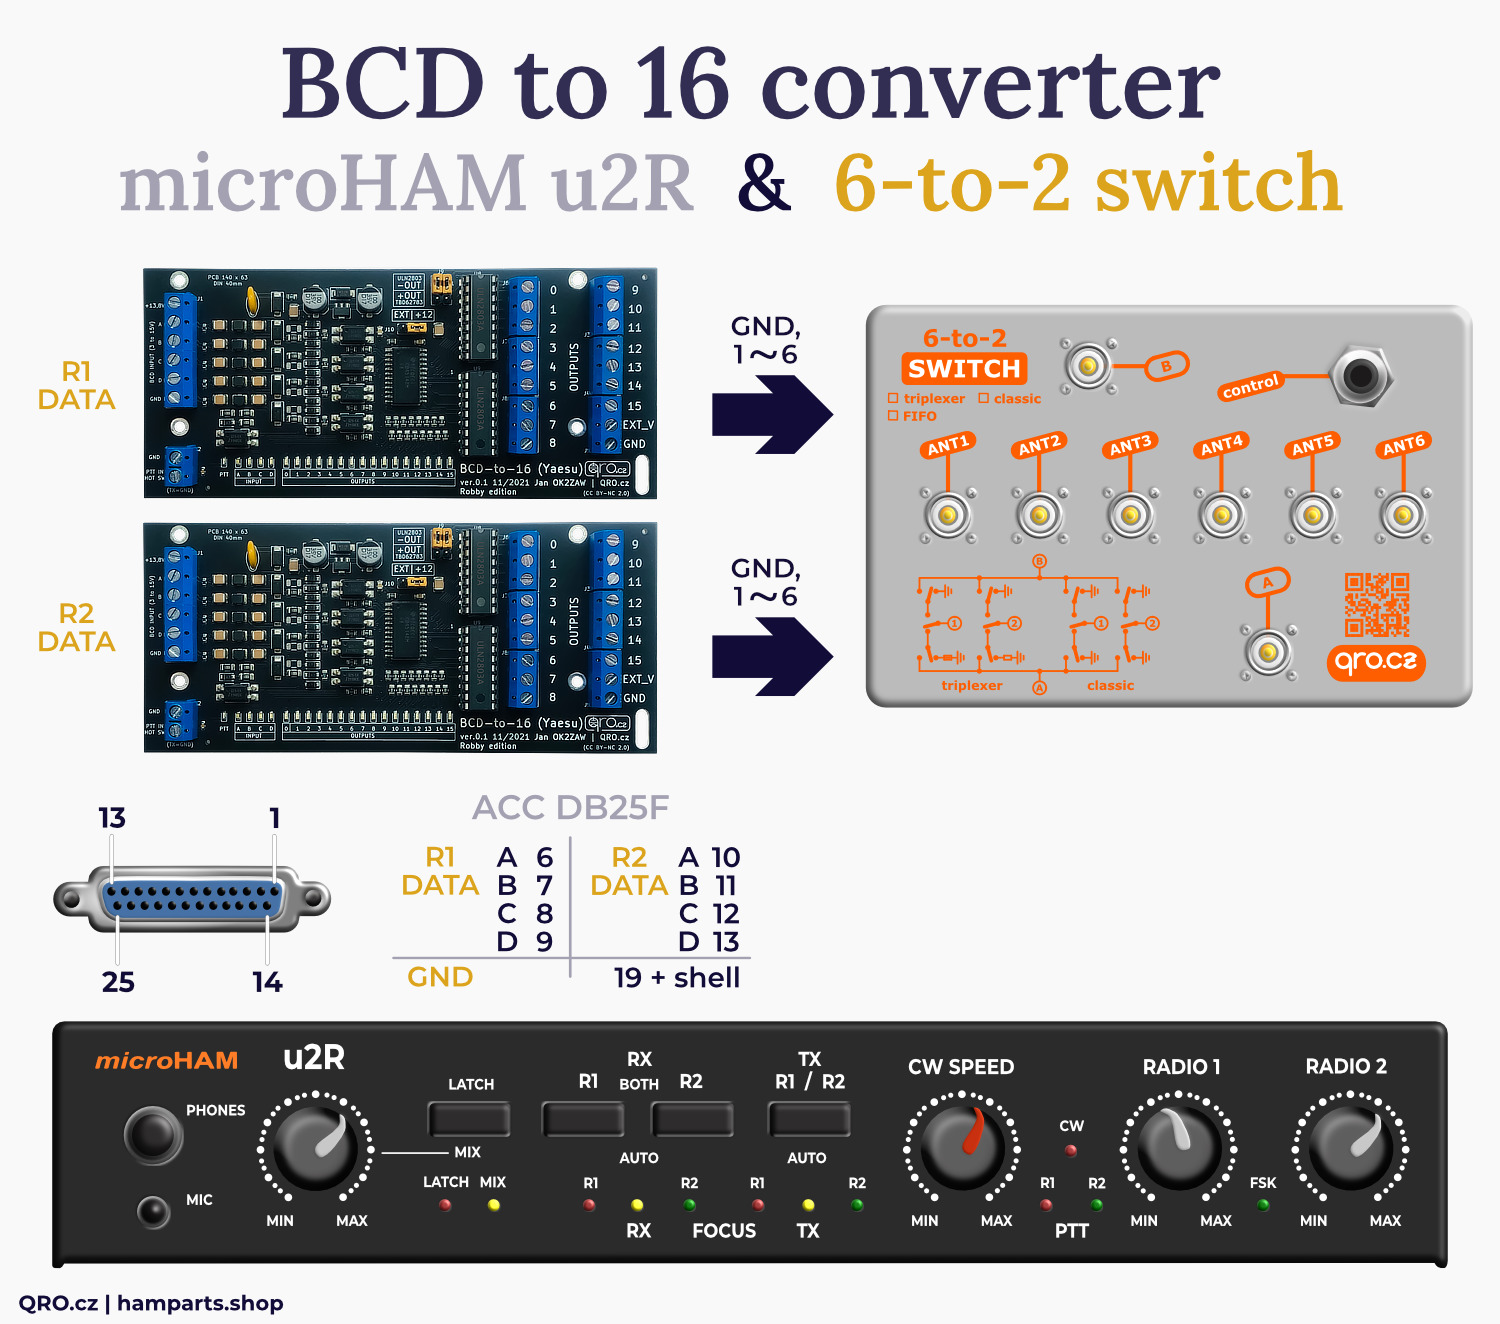 BCD to 16 version converter with 6 to 2 antenna switch and microHAM by qro.cz hamparts.shop